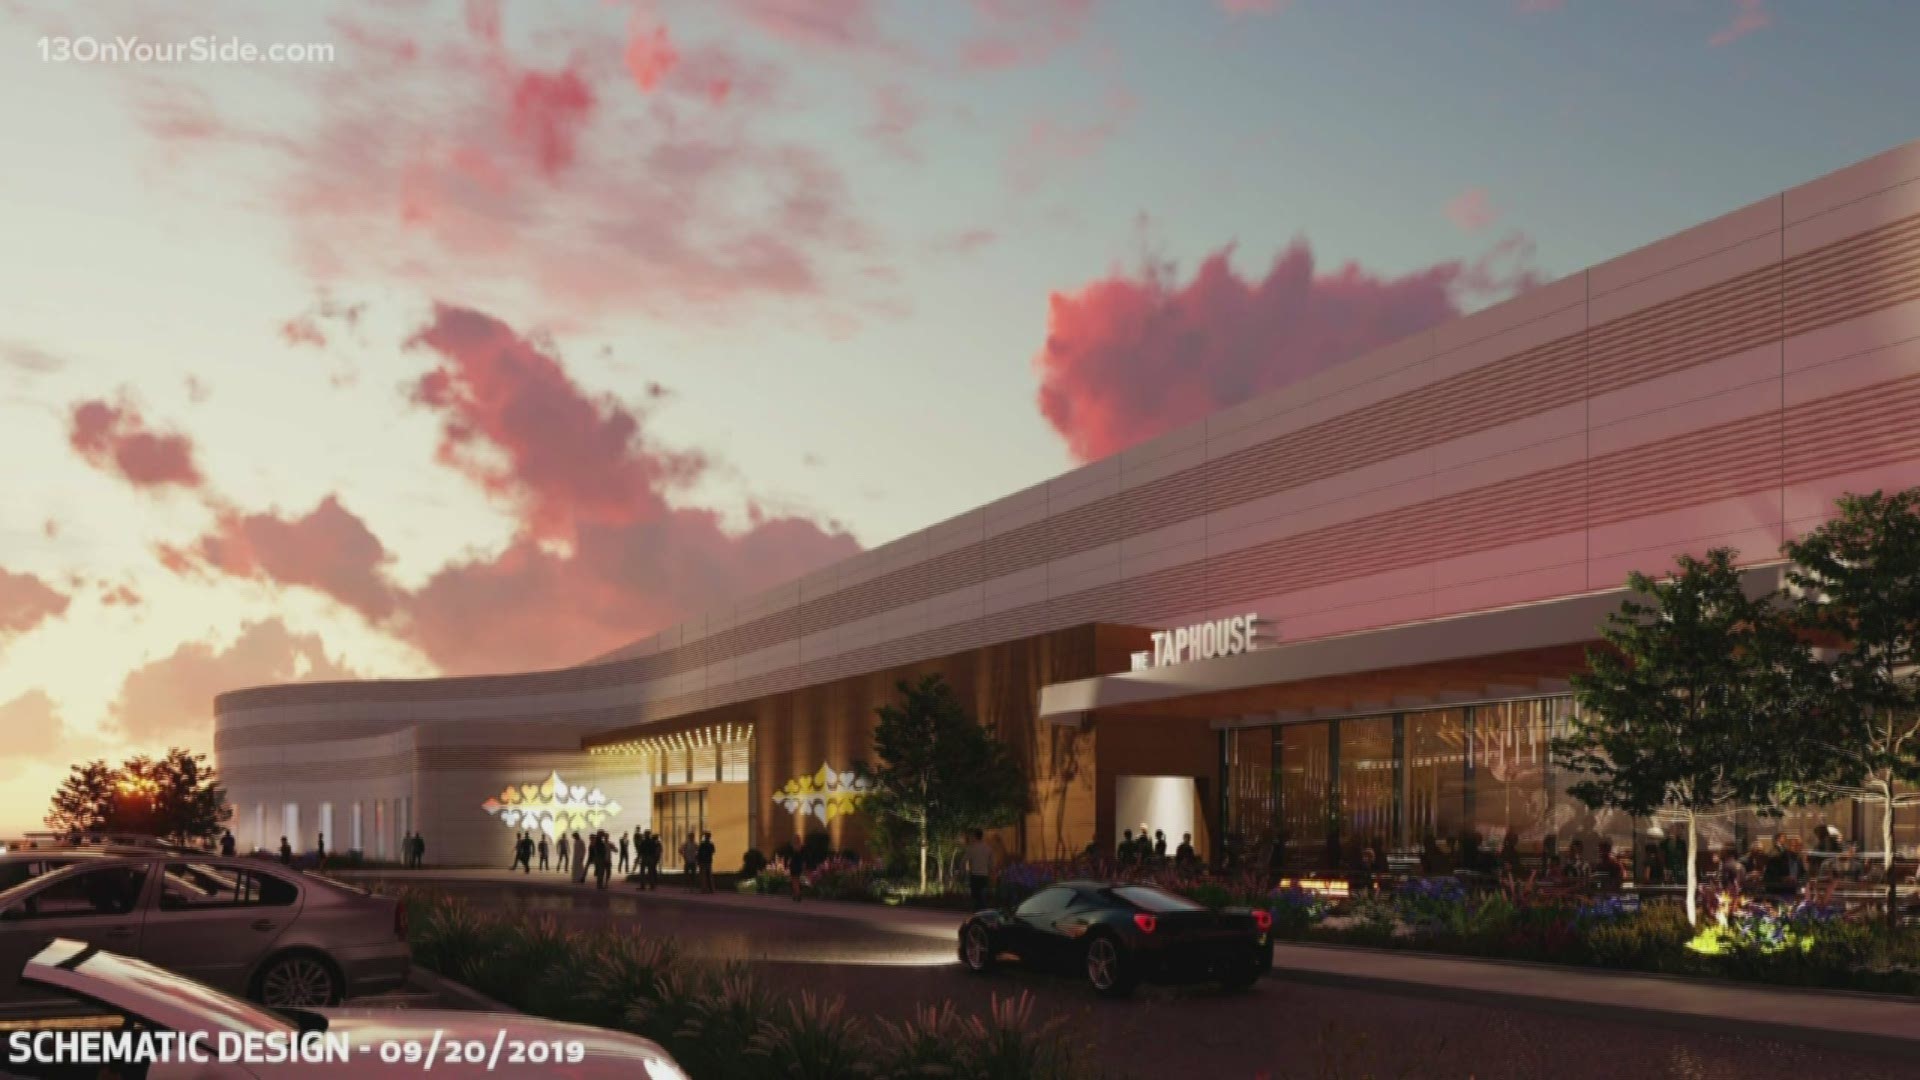 Gun Lake Casino has announced a $100 million expansion plan that will nearly double the size of the current building.